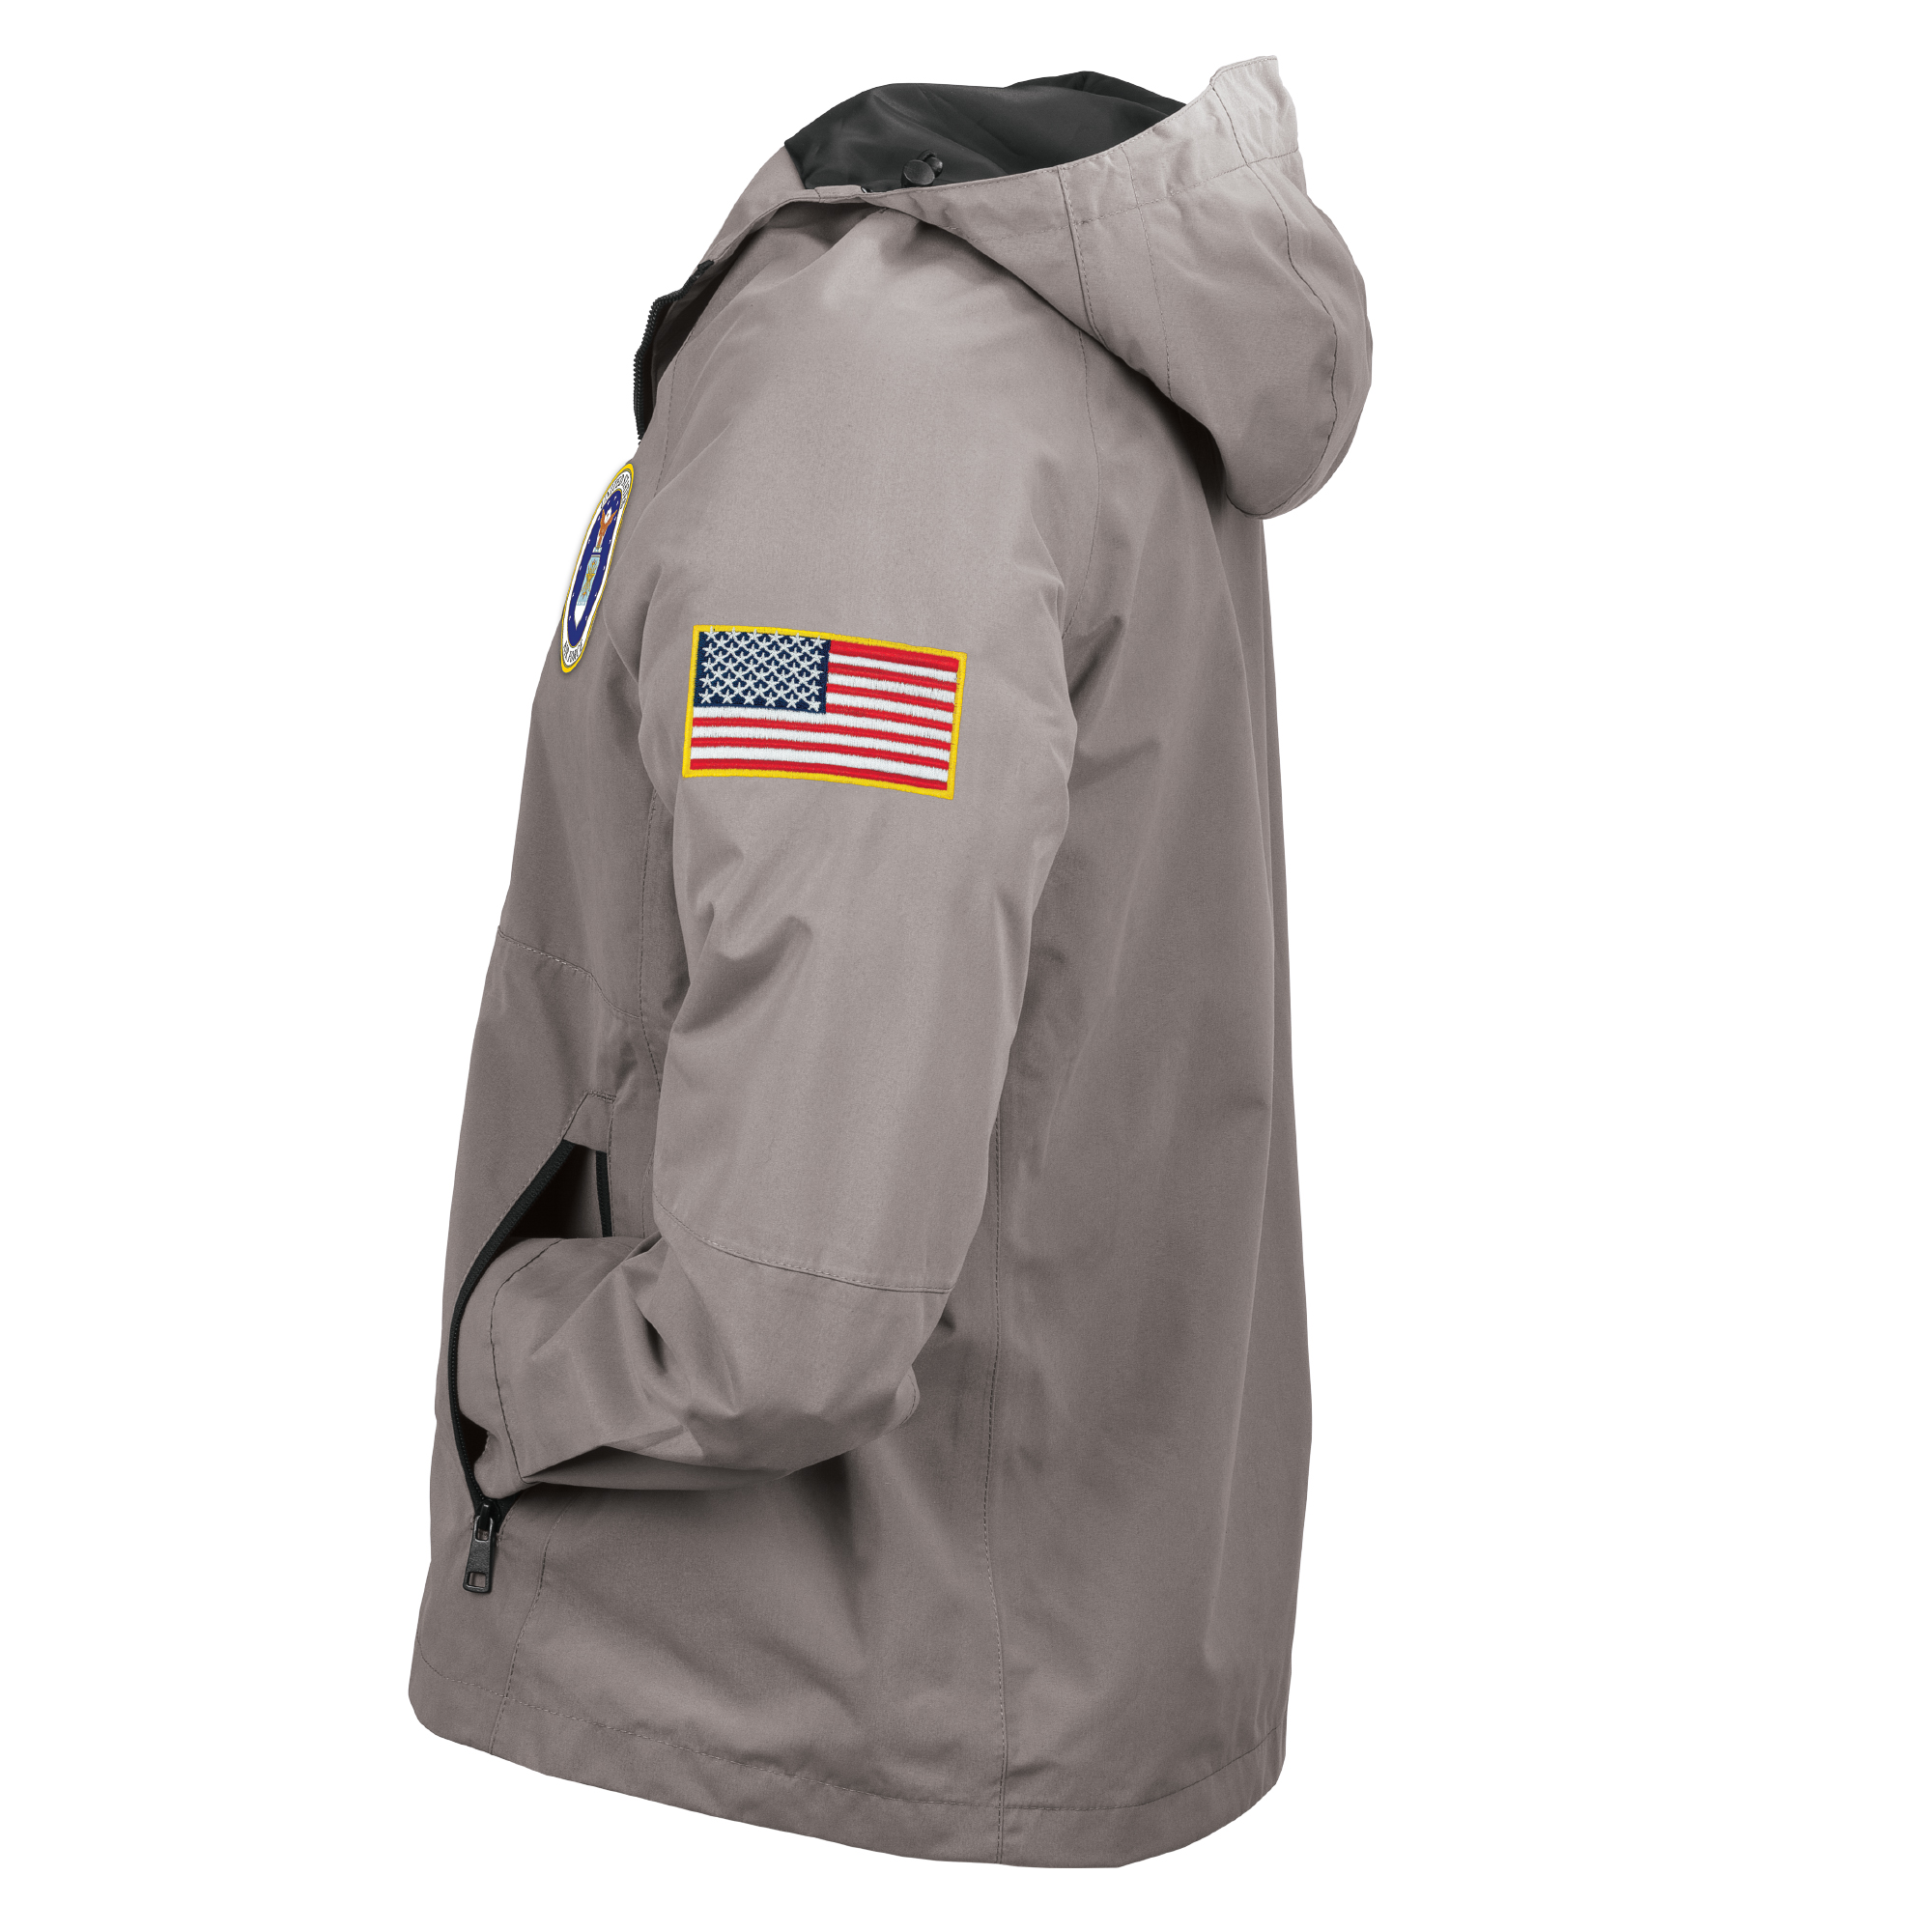 The Personalized US Air Force Windbreaker 6389 0032 a main